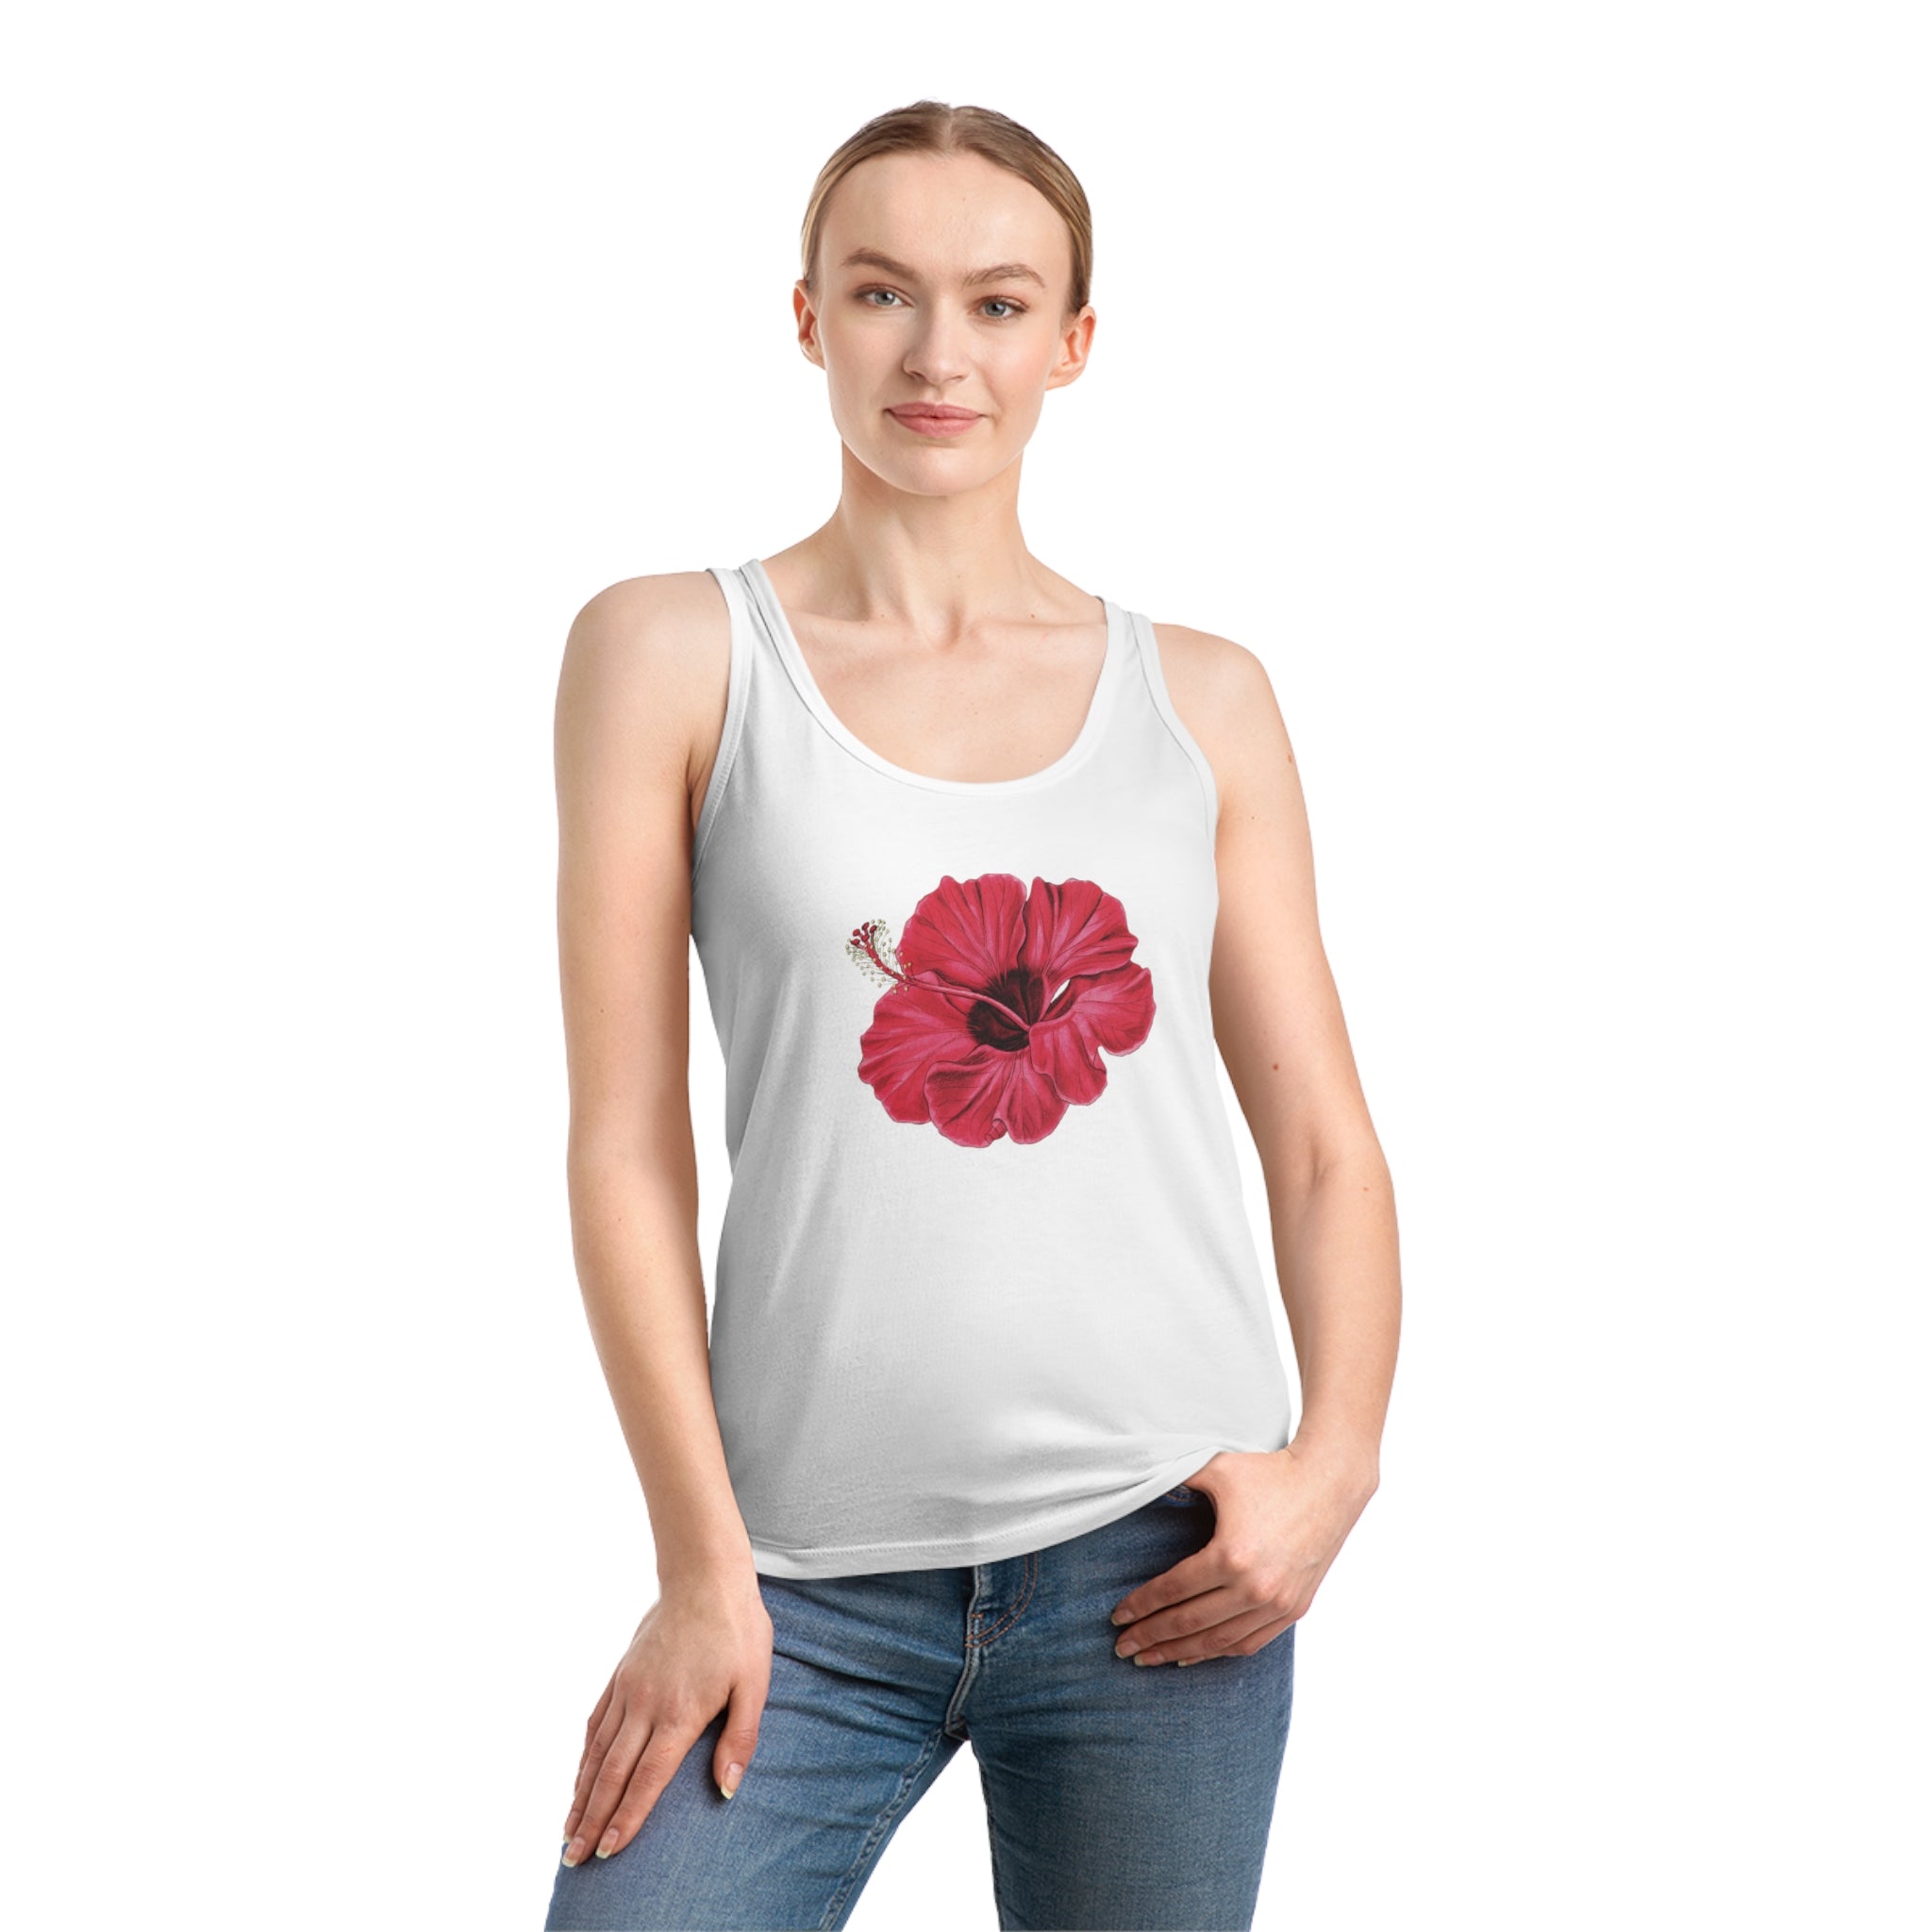 A Flower Red Tank Top with a red hibiscus flower on it.